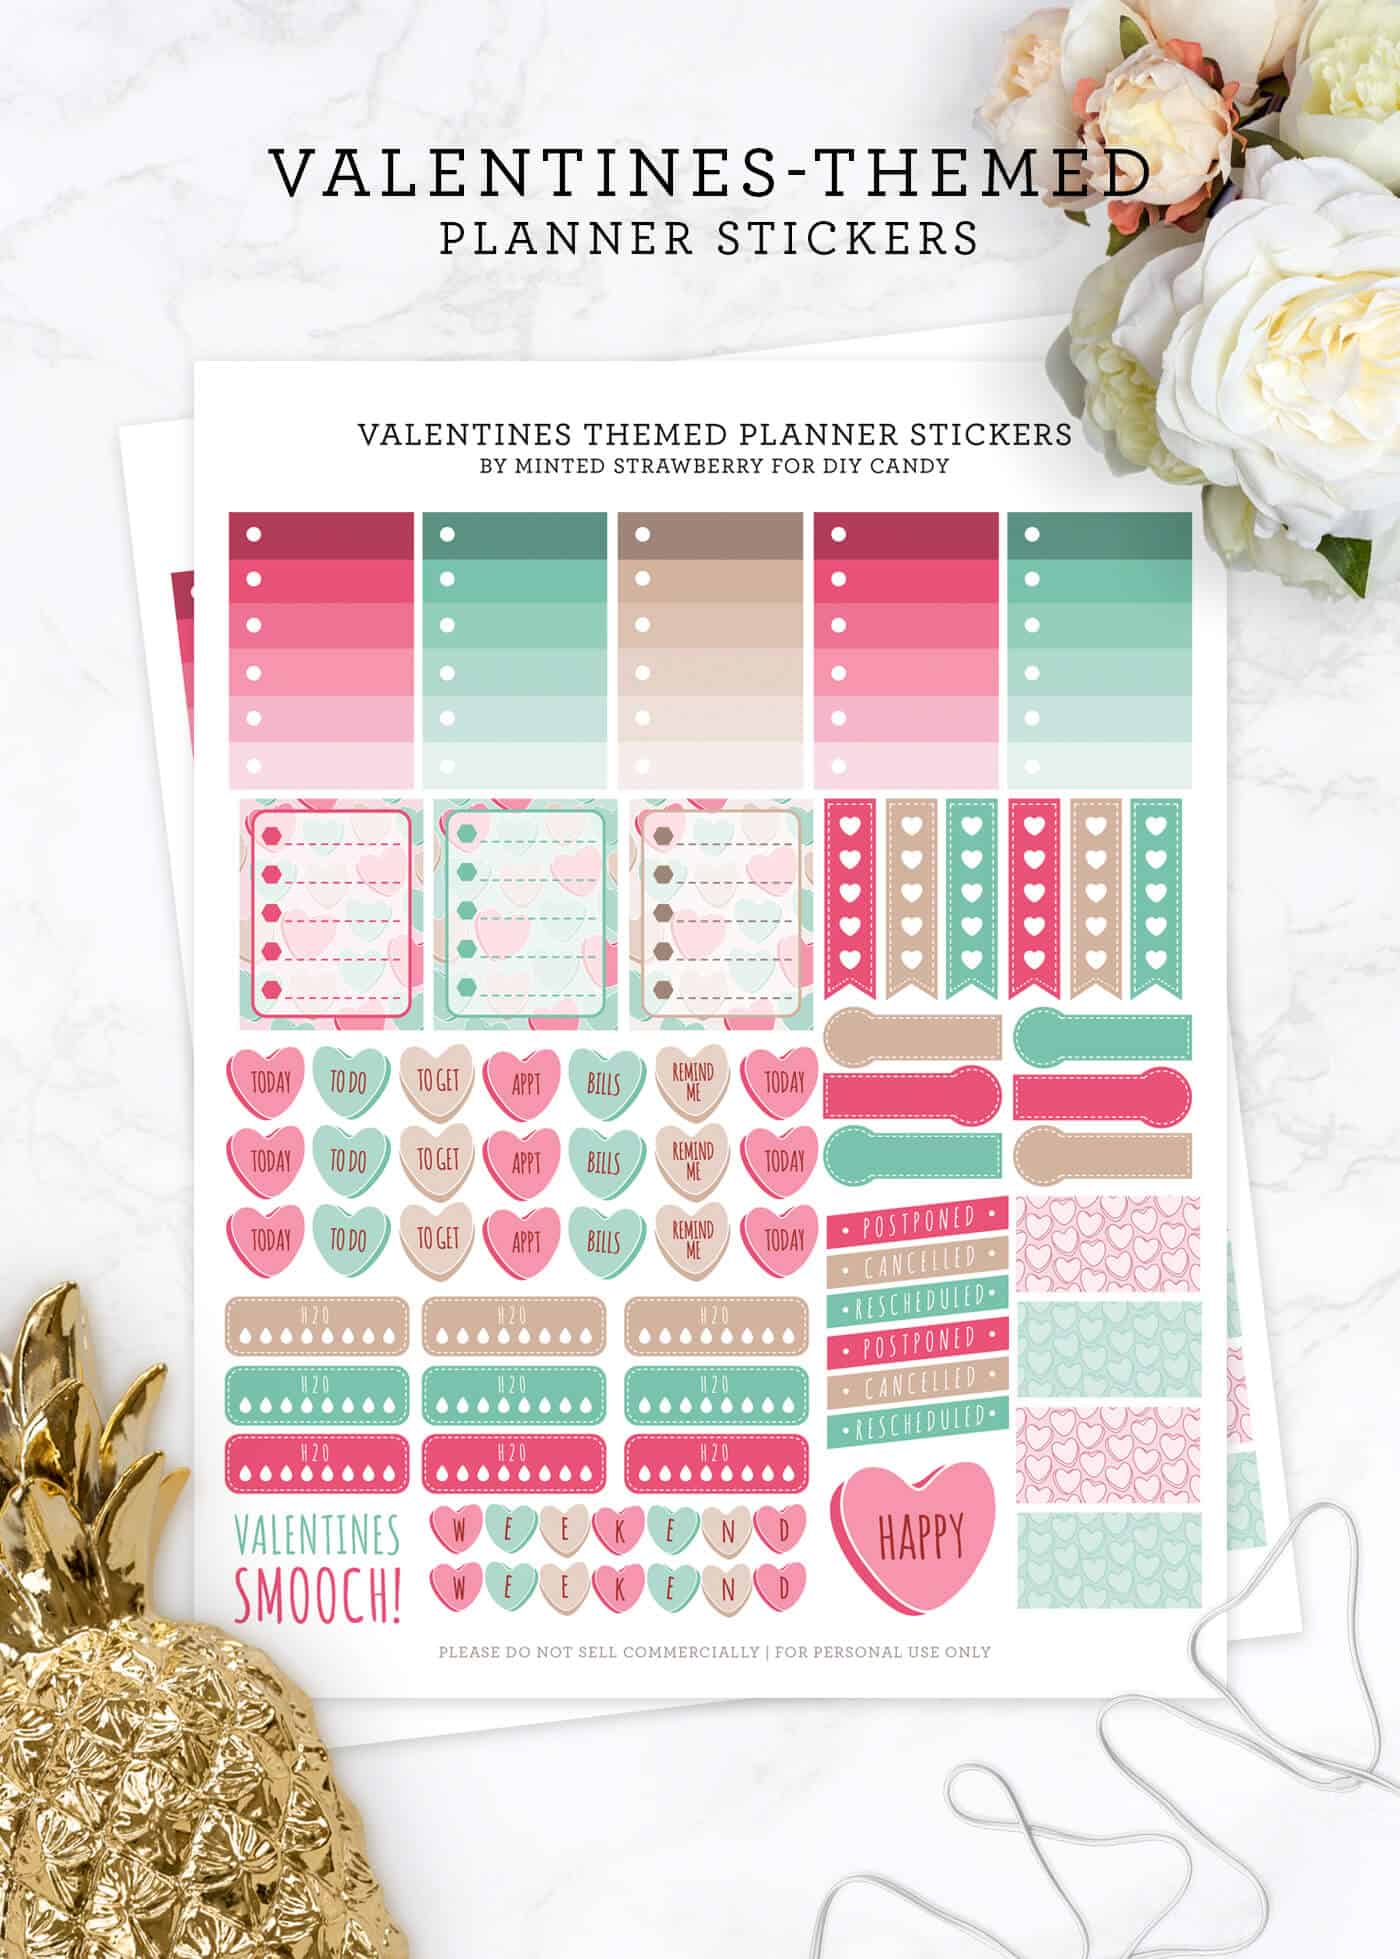 Free Valentines Planner Stickers with a Cute Theme